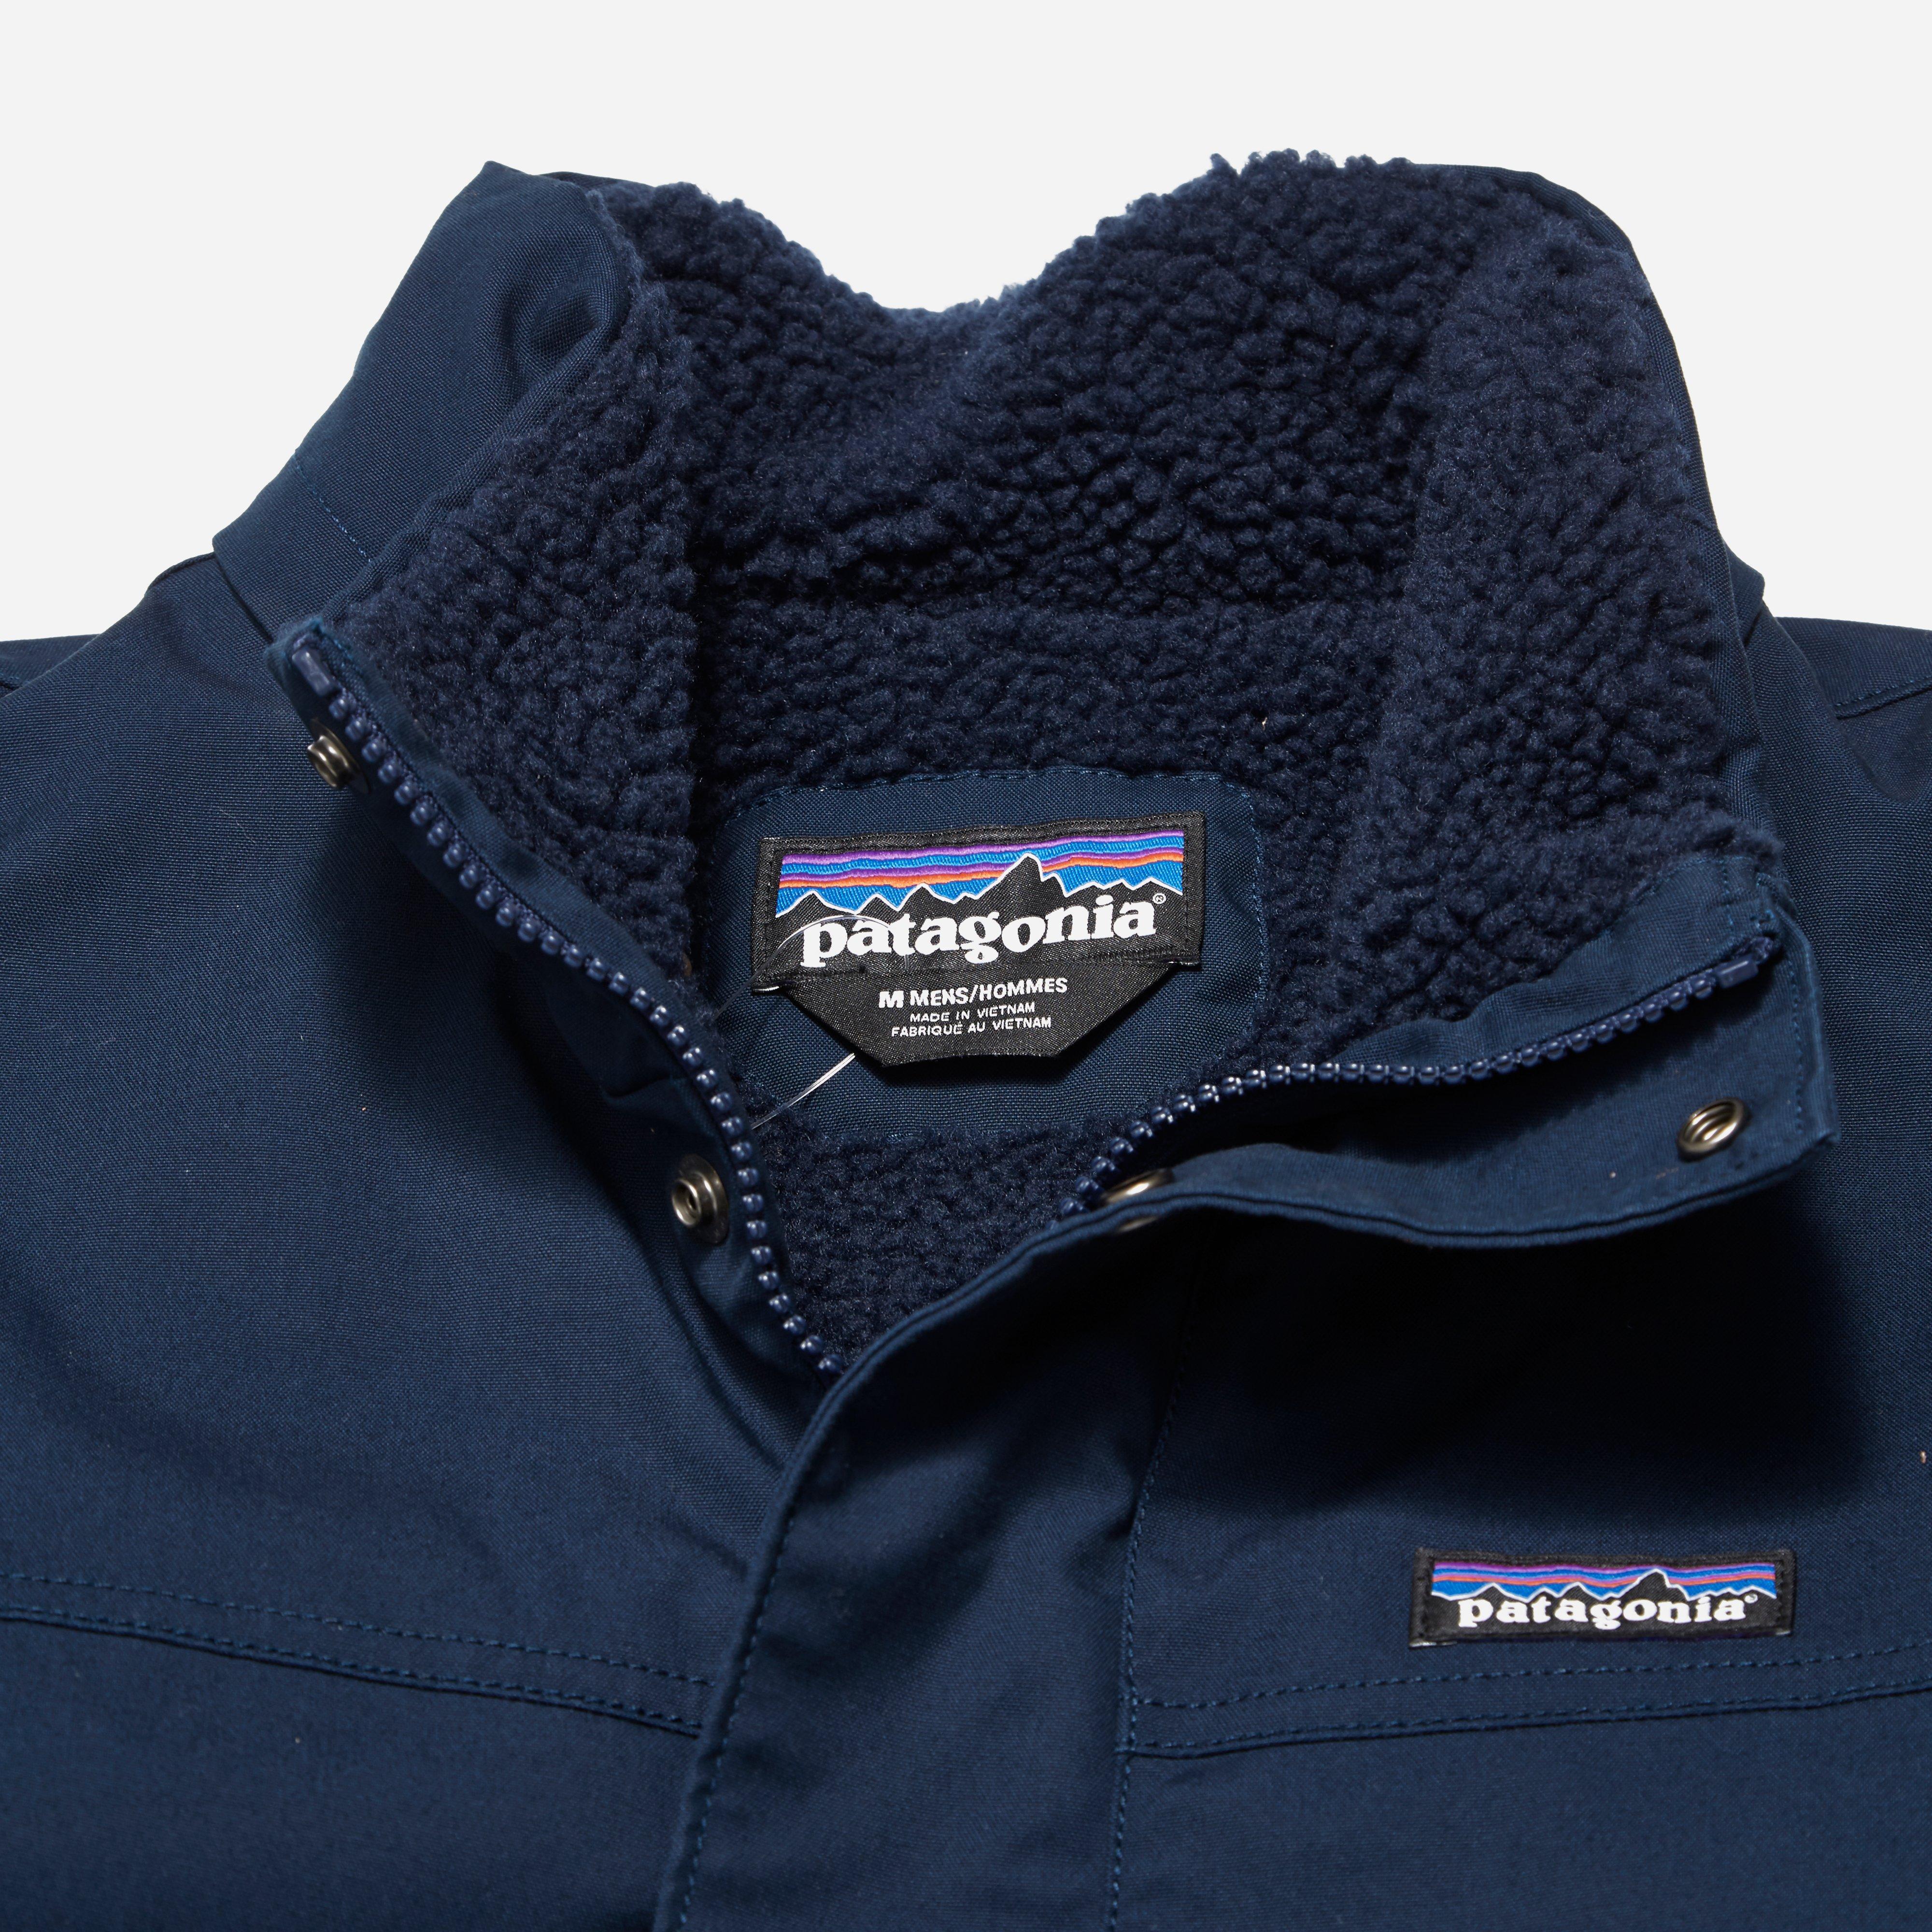 Patagonia Maple Grove Canvas Jacket in Navy (Blue) for Men - Lyst